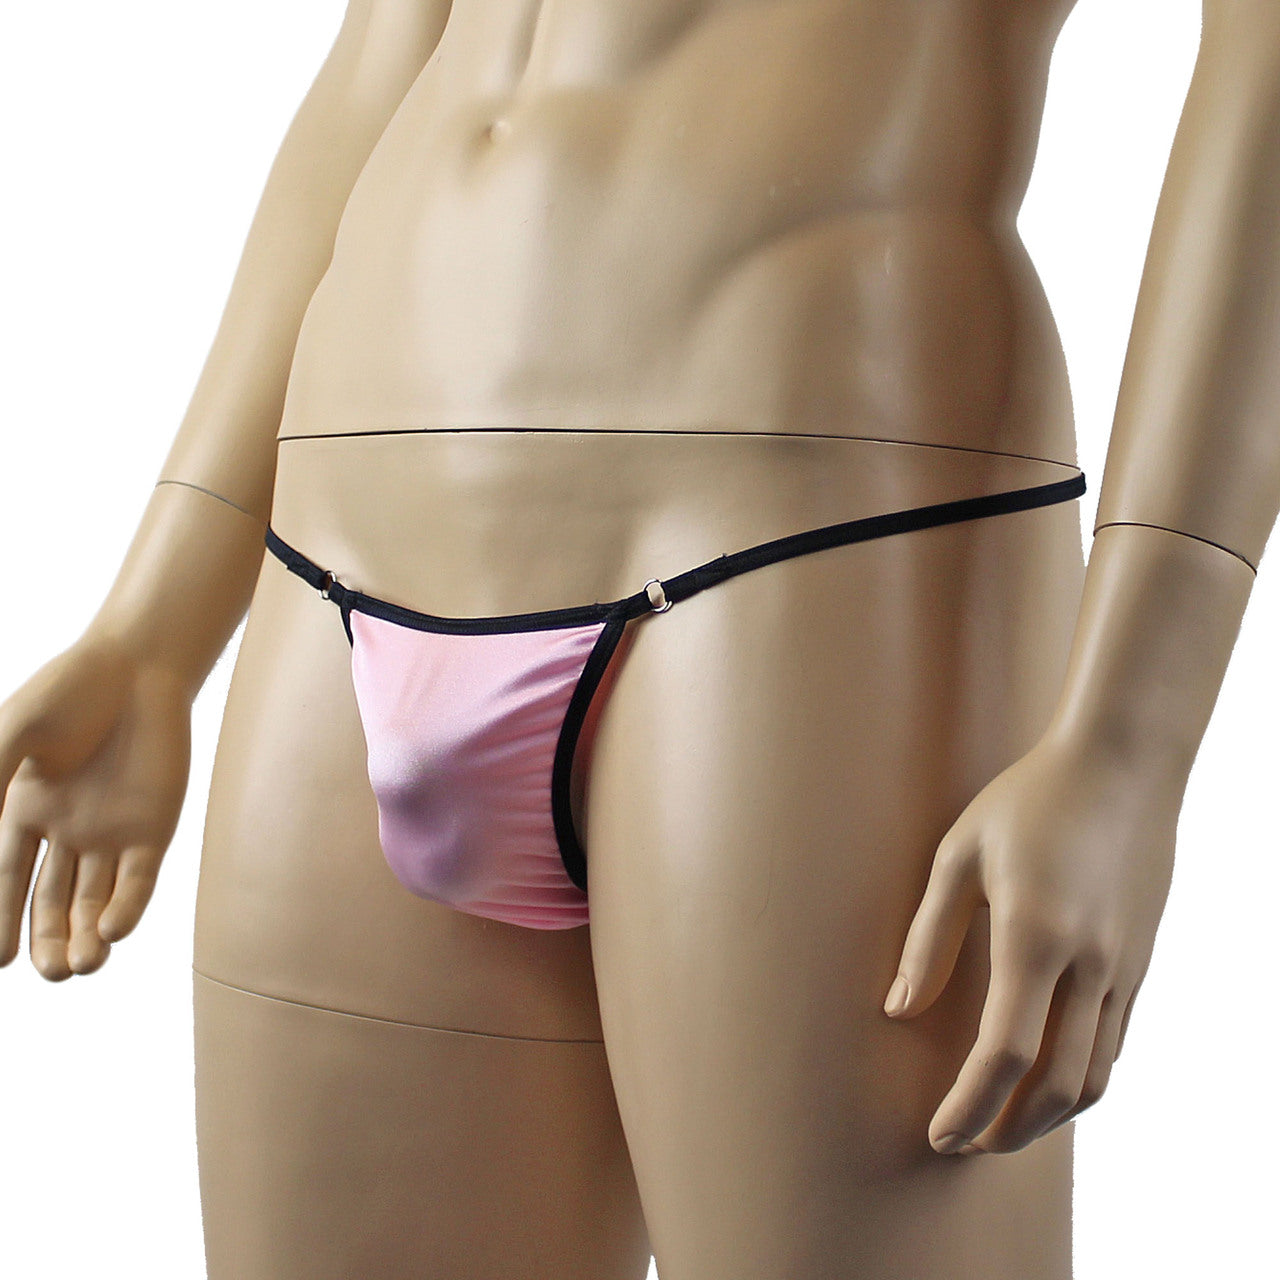 Mens Max Sexy and Cute Mini Pouch Front G string Light Pink